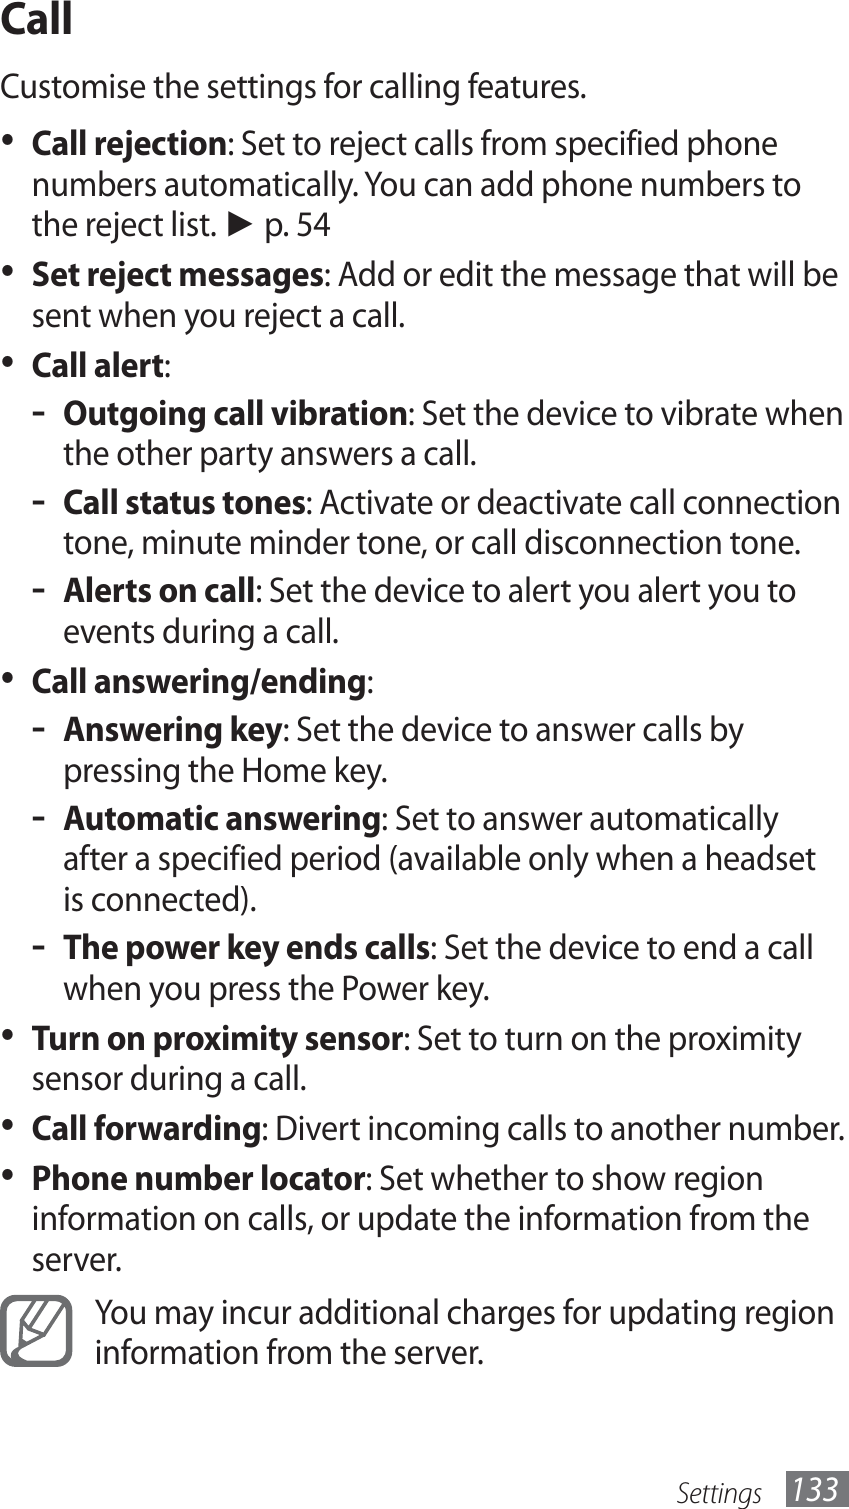 Settings 133CallCustomise the settings for calling features.Call rejection•  : Set to reject calls from specified phone numbers automatically. You can add phone numbers to the reject list. ► p. 54Set reject messages•  : Add or edit the message that will be sent when you reject a call.Call alert•  :Outgoing call vibration - : Set the device to vibrate when the other party answers a call.Call status tones - : Activate or deactivate call connection tone, minute minder tone, or call disconnection tone.Alerts on call - : Set the device to alert you alert you to events during a call.Call answering/ending•  :Answering key - : Set the device to answer calls by pressing the Home key.Automatic answering - : Set to answer automatically after a specified period (available only when a headset is connected).The power key ends calls - : Set the device to end a call when you press the Power key.•  Turn on proximity sensor: Set to turn on the proximity sensor during a call.Call forwarding•  : Divert incoming calls to another number.Phone number locator•  : Set whether to show region information on calls, or update the information from the server.You may incur additional charges for updating region information from the server.